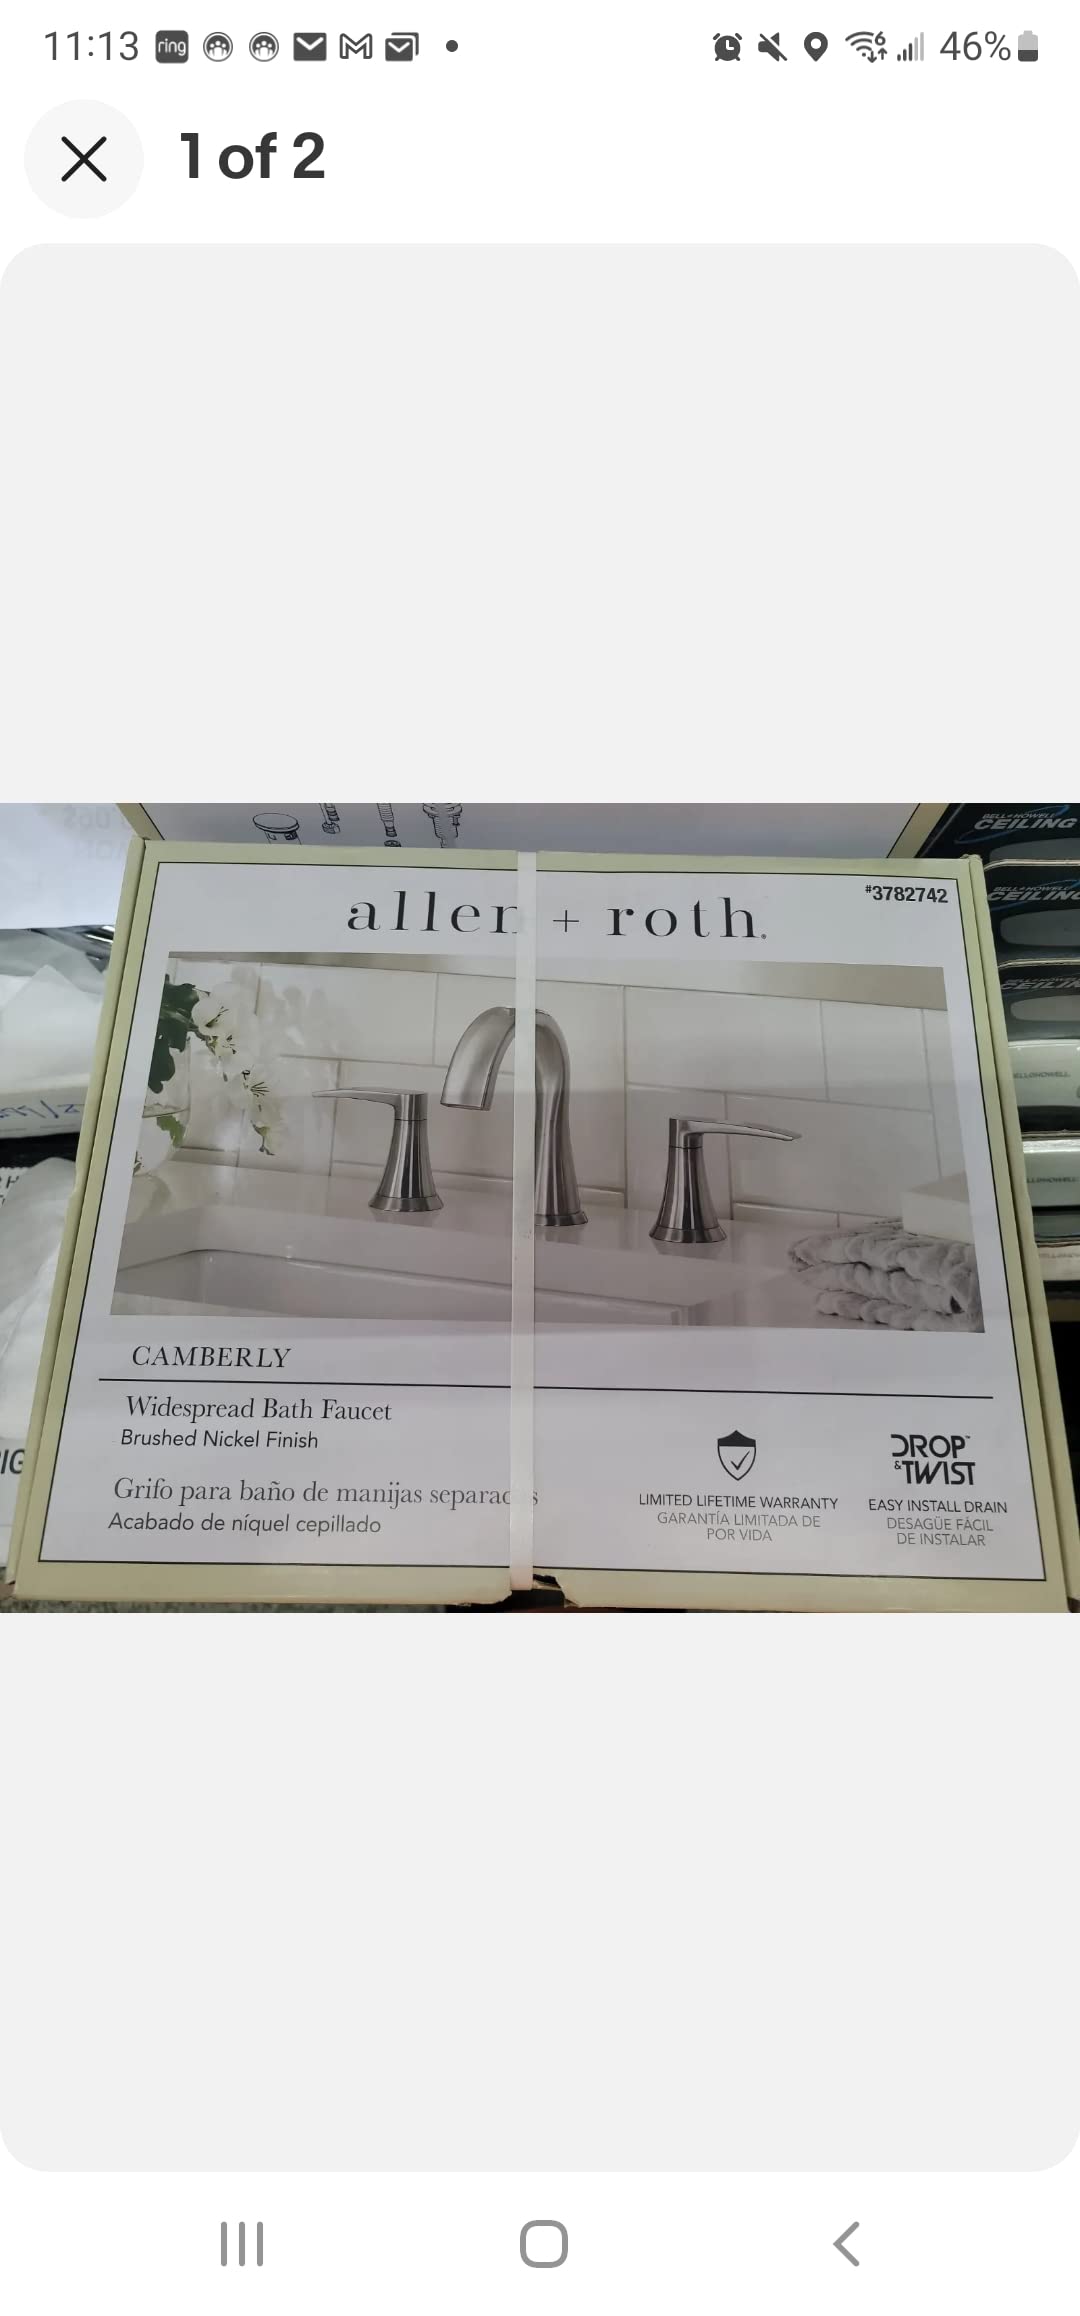 Allen + roth camberly Widespread Bath Faucet